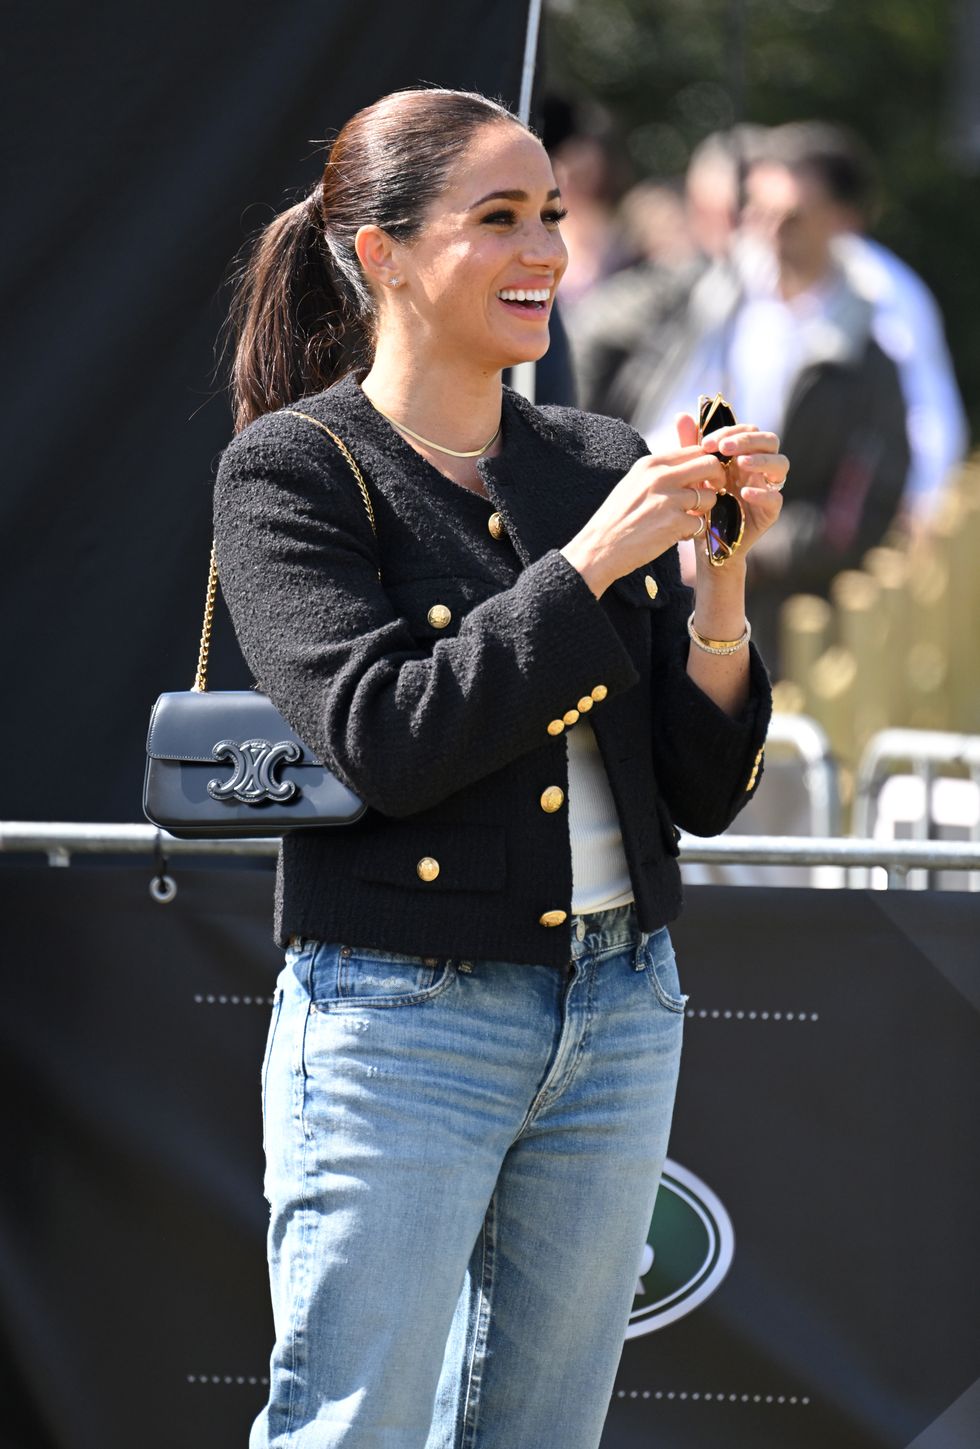 Casual Style Inspiration from the Royal Family